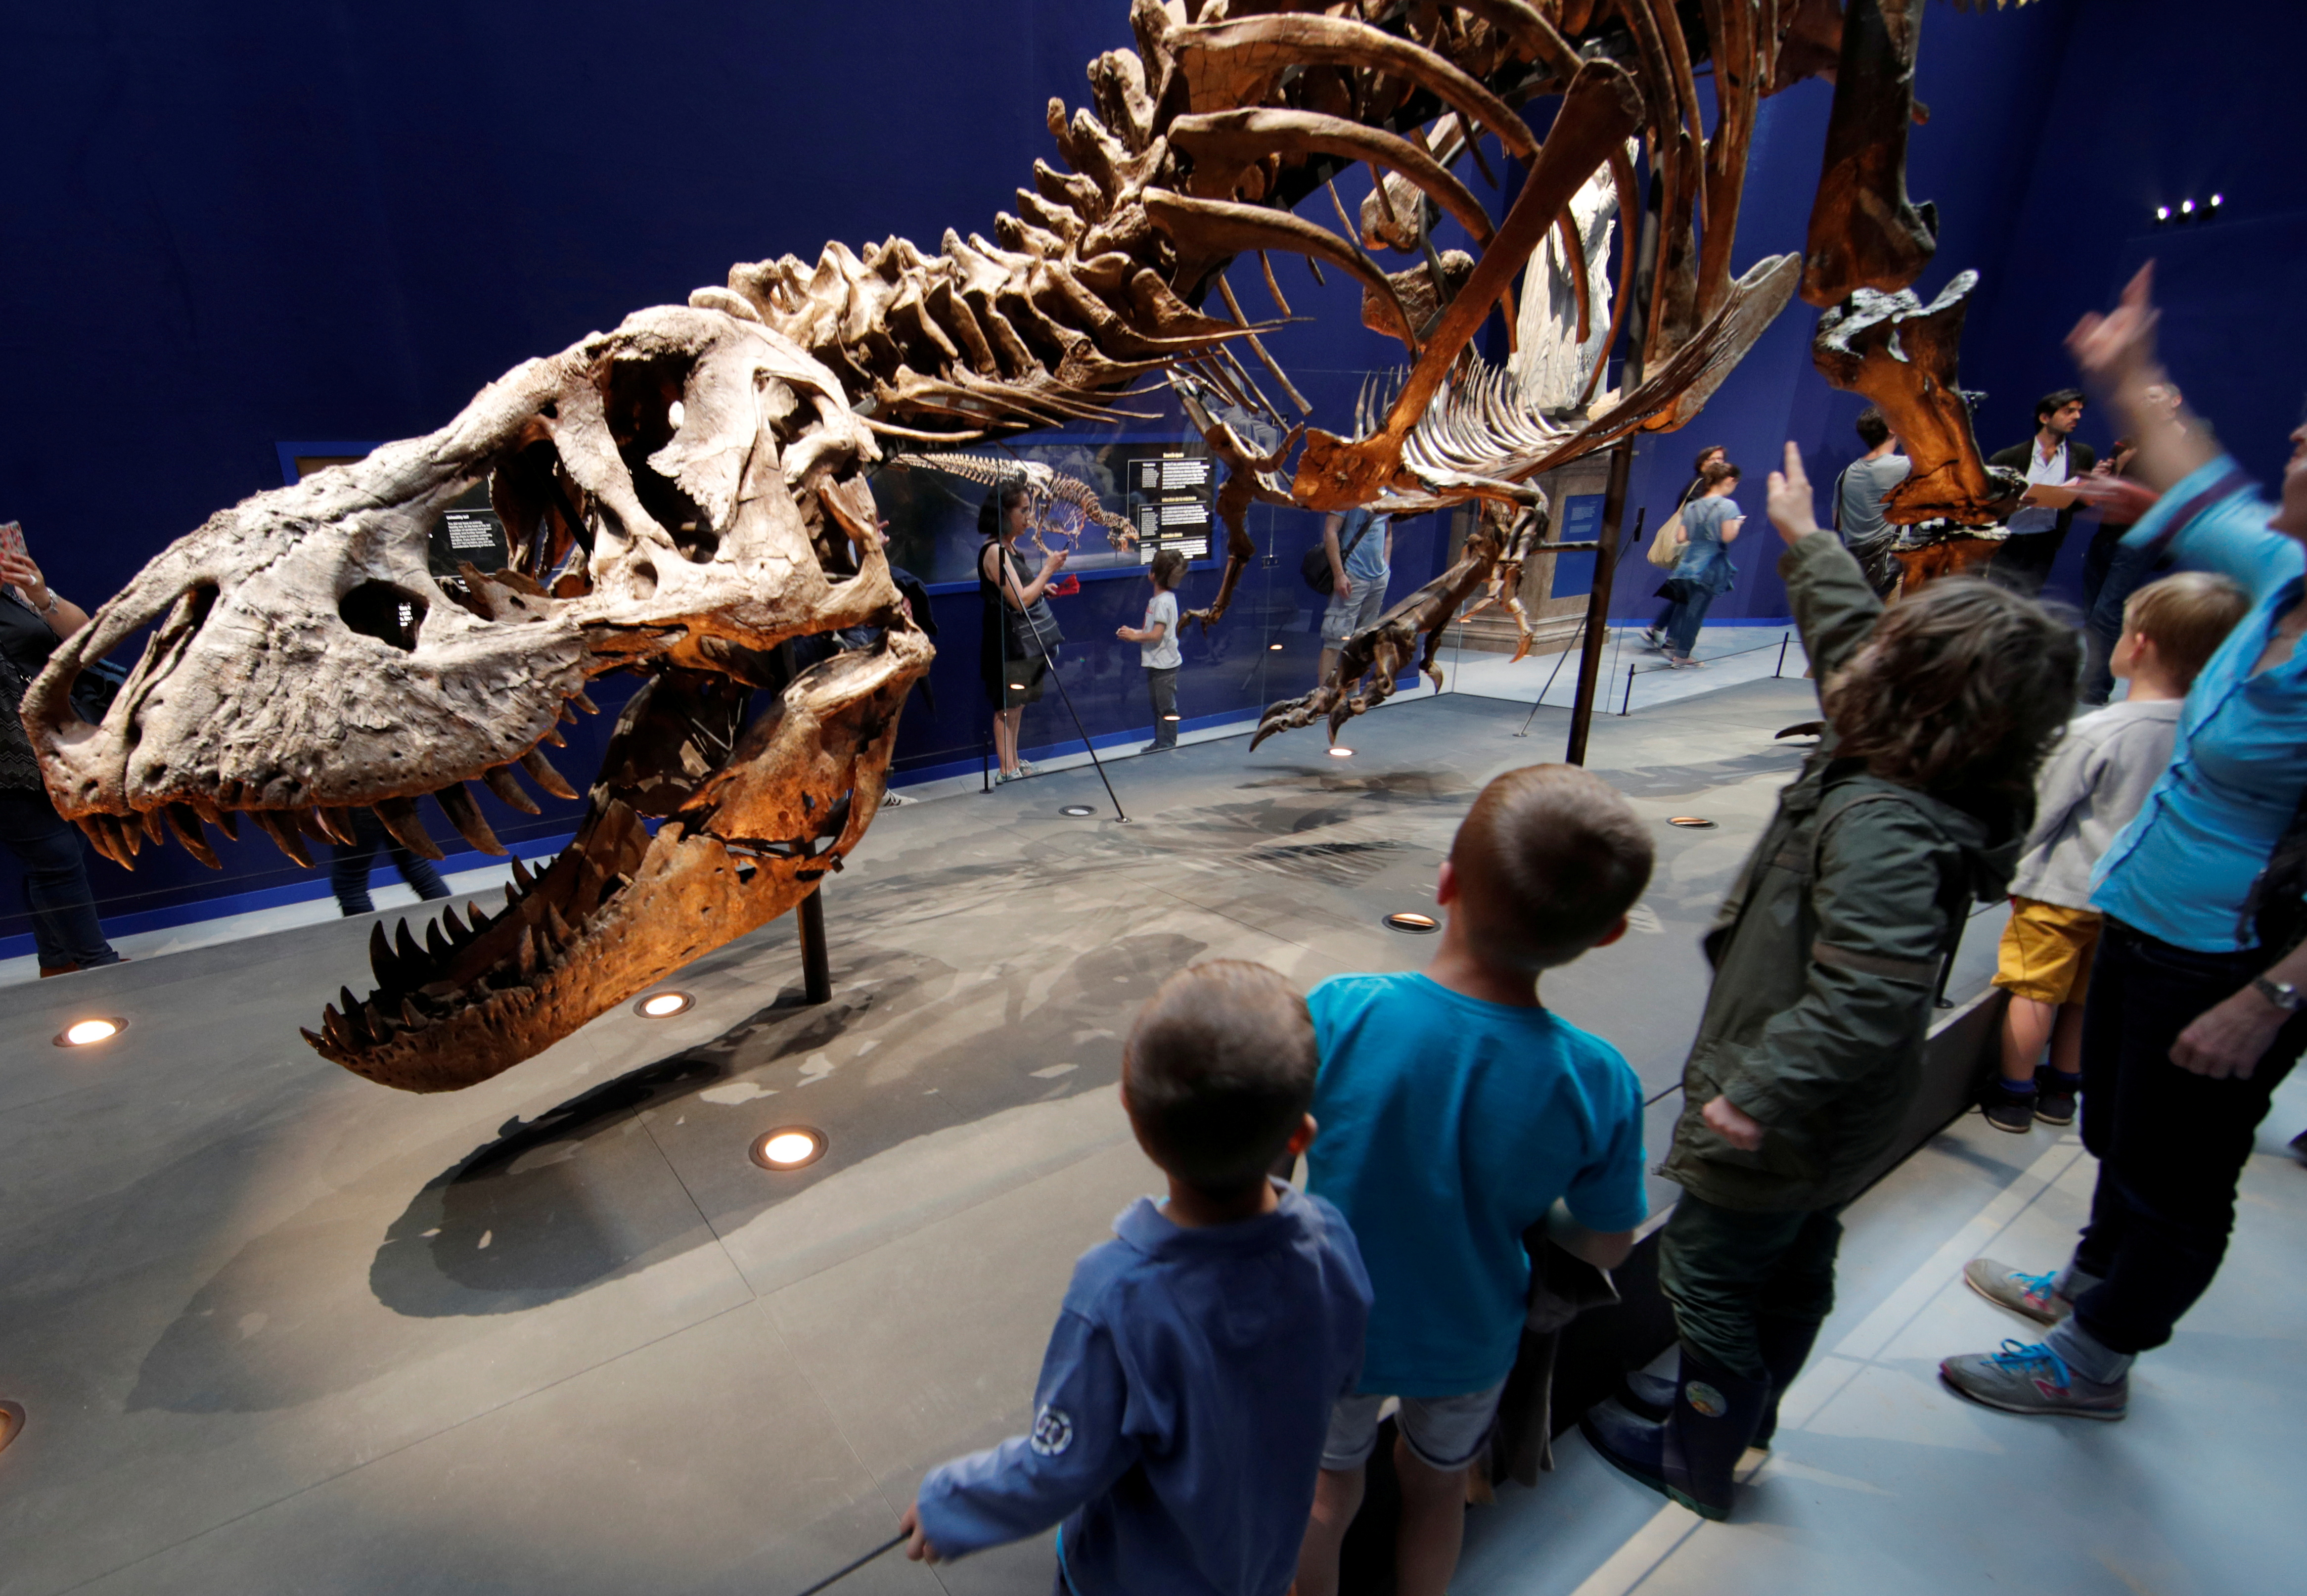 Visitors look at a 67 million year-old skeleton of a Tyrannosaurus Rex dinosaur, named Trix, during the first day of the exhibition 